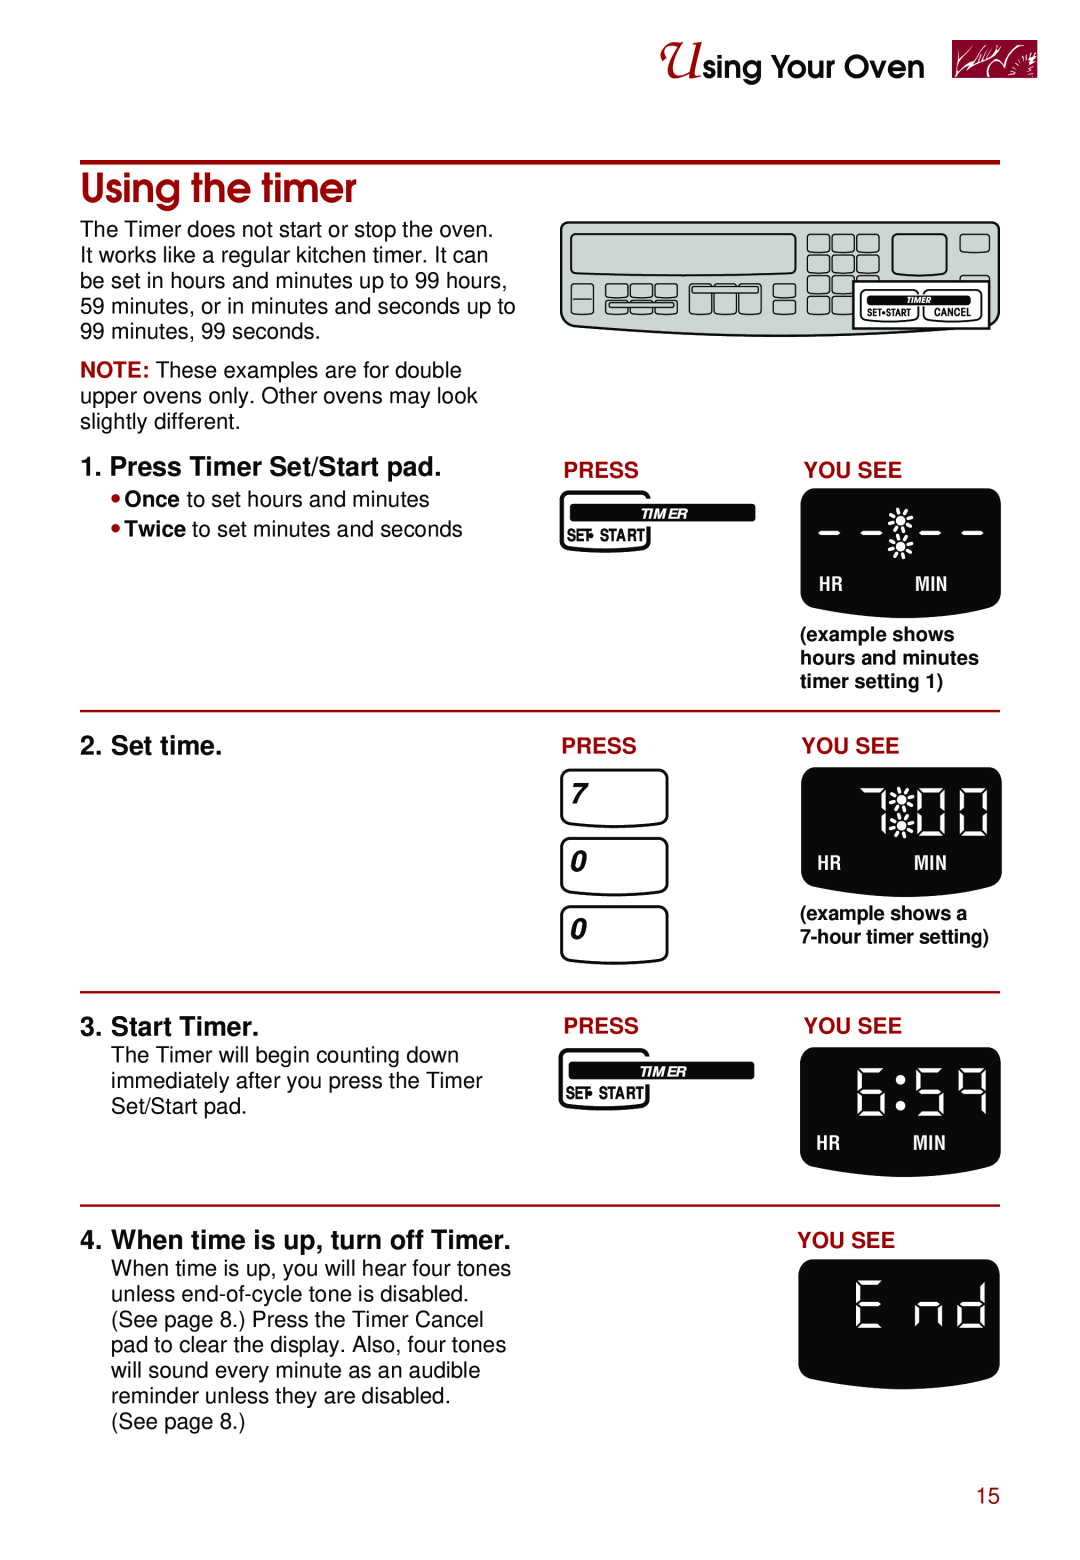 Whirlpool KEBS207D Using the timer, Press Timer Set/Start pad, Set time, Start Timer, When time is up, turn off Timer 